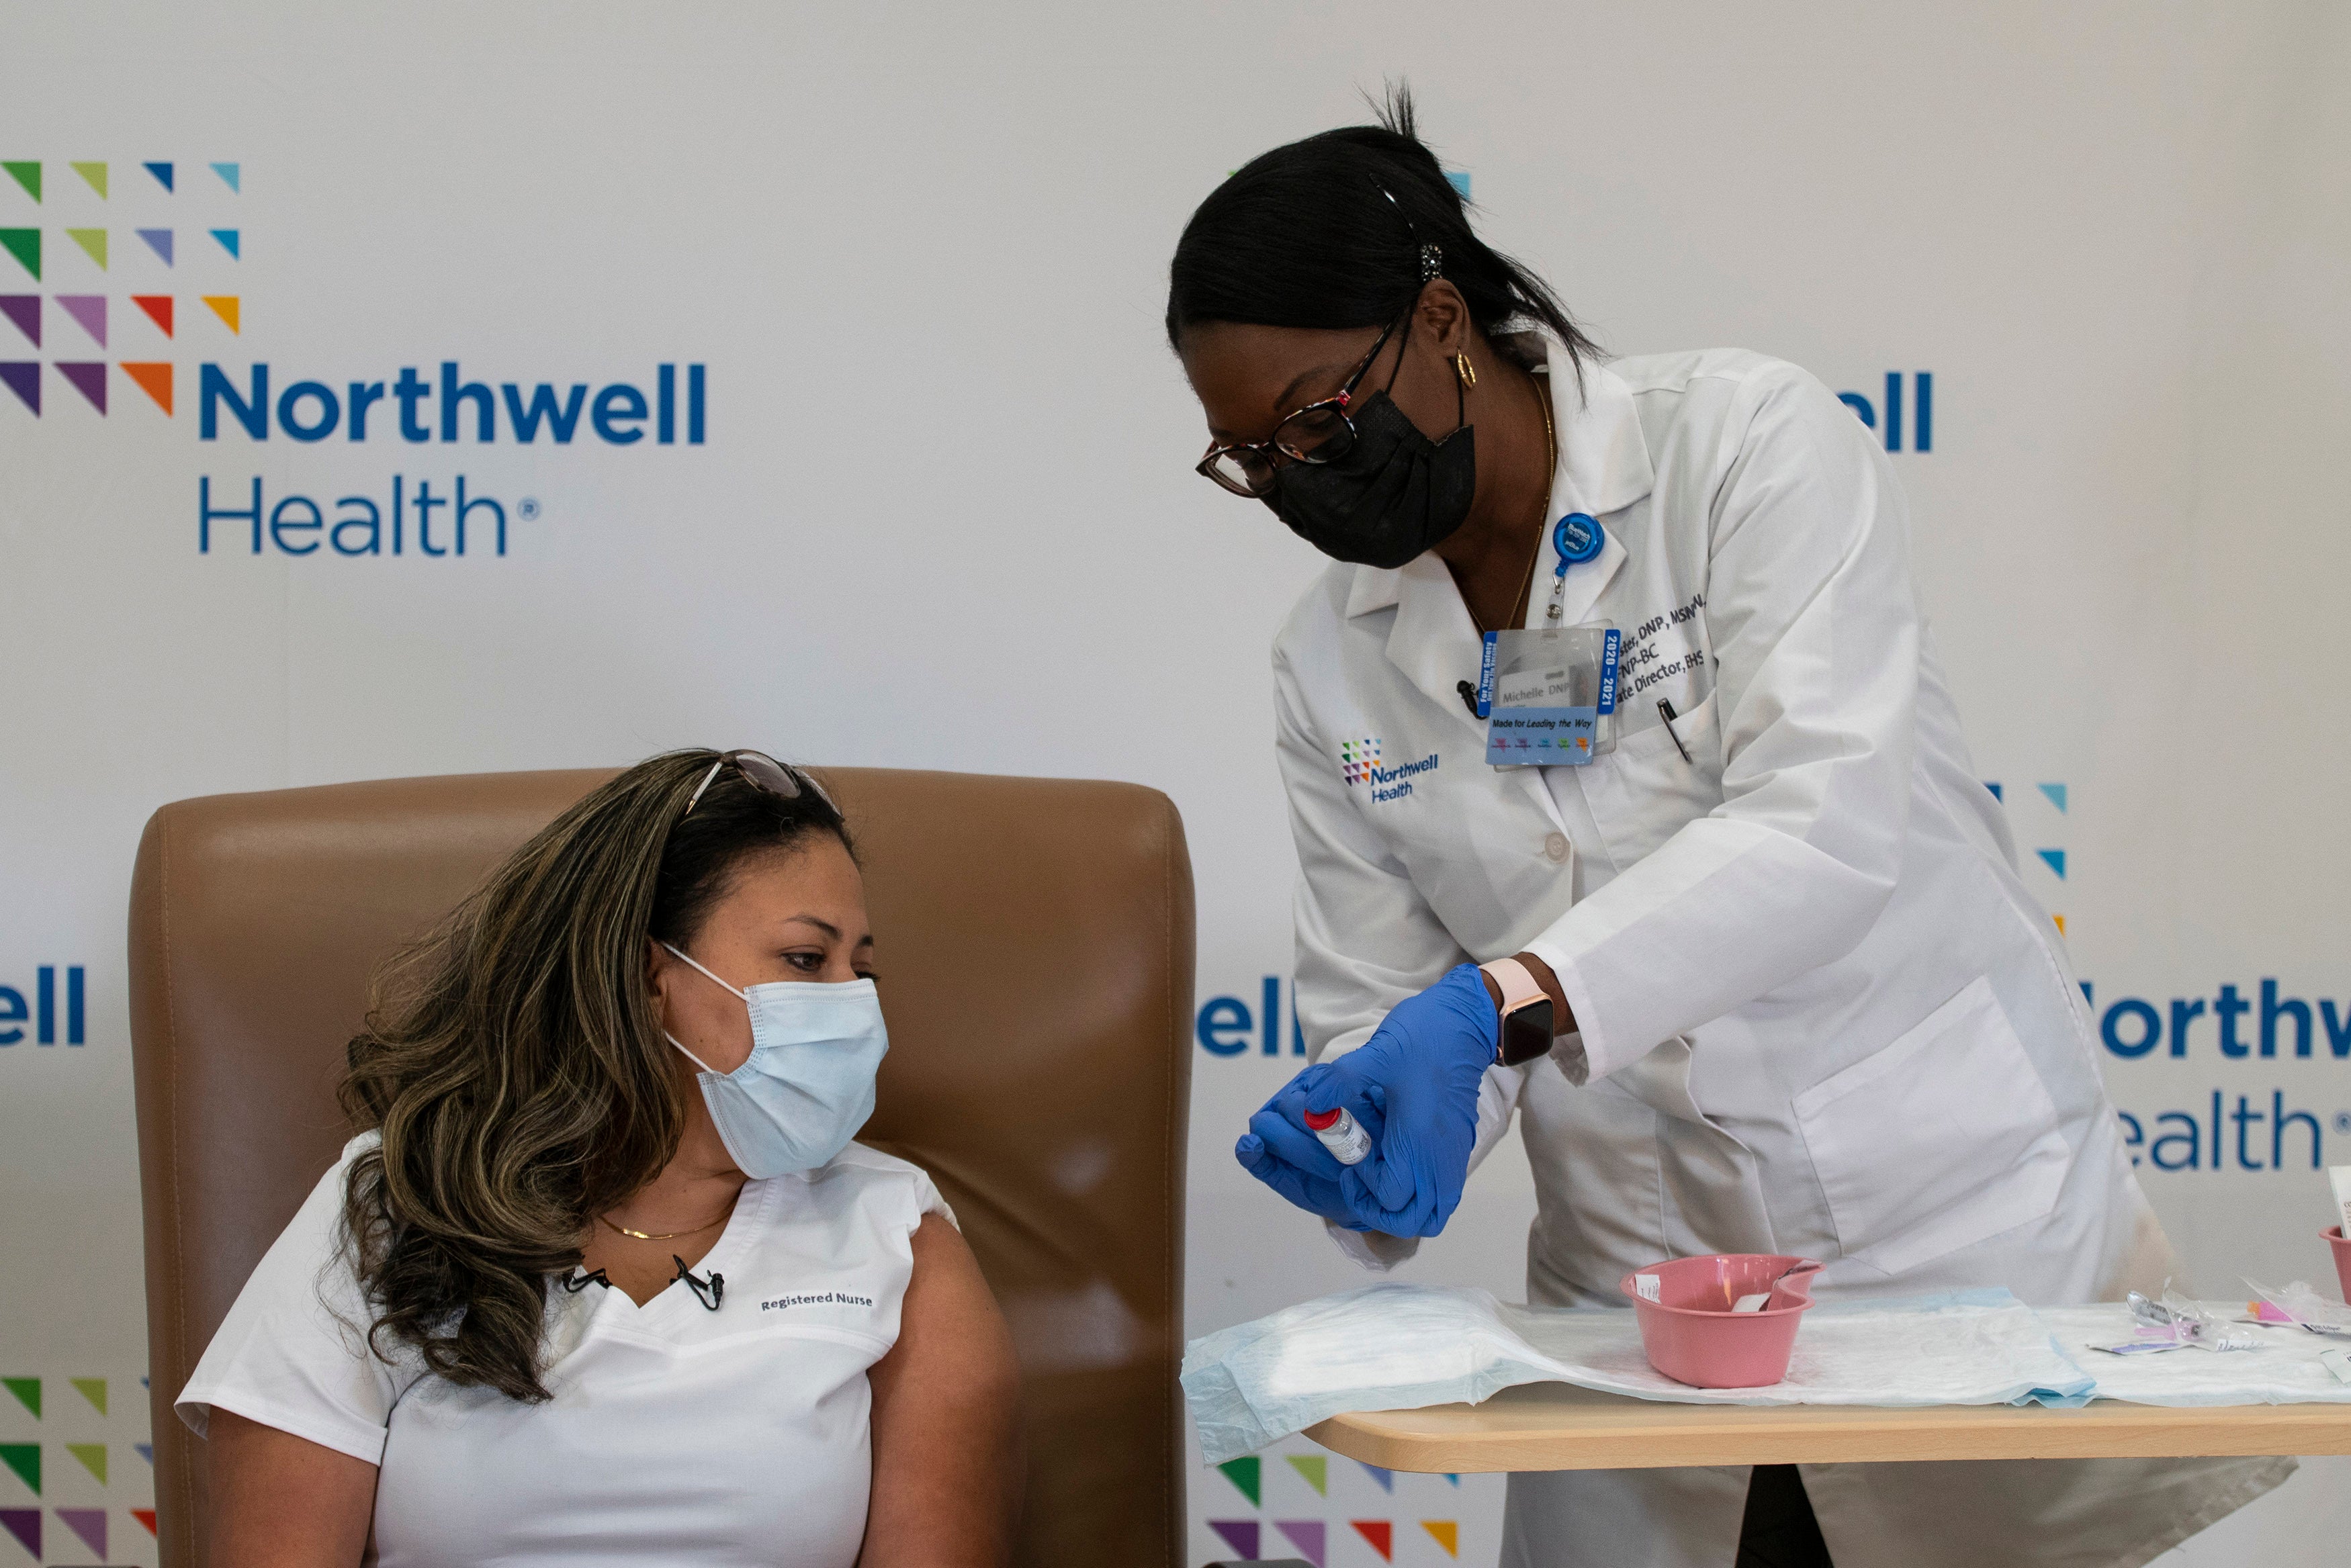 A woman is administered with the vaccine by a medical professional at Northwell Health